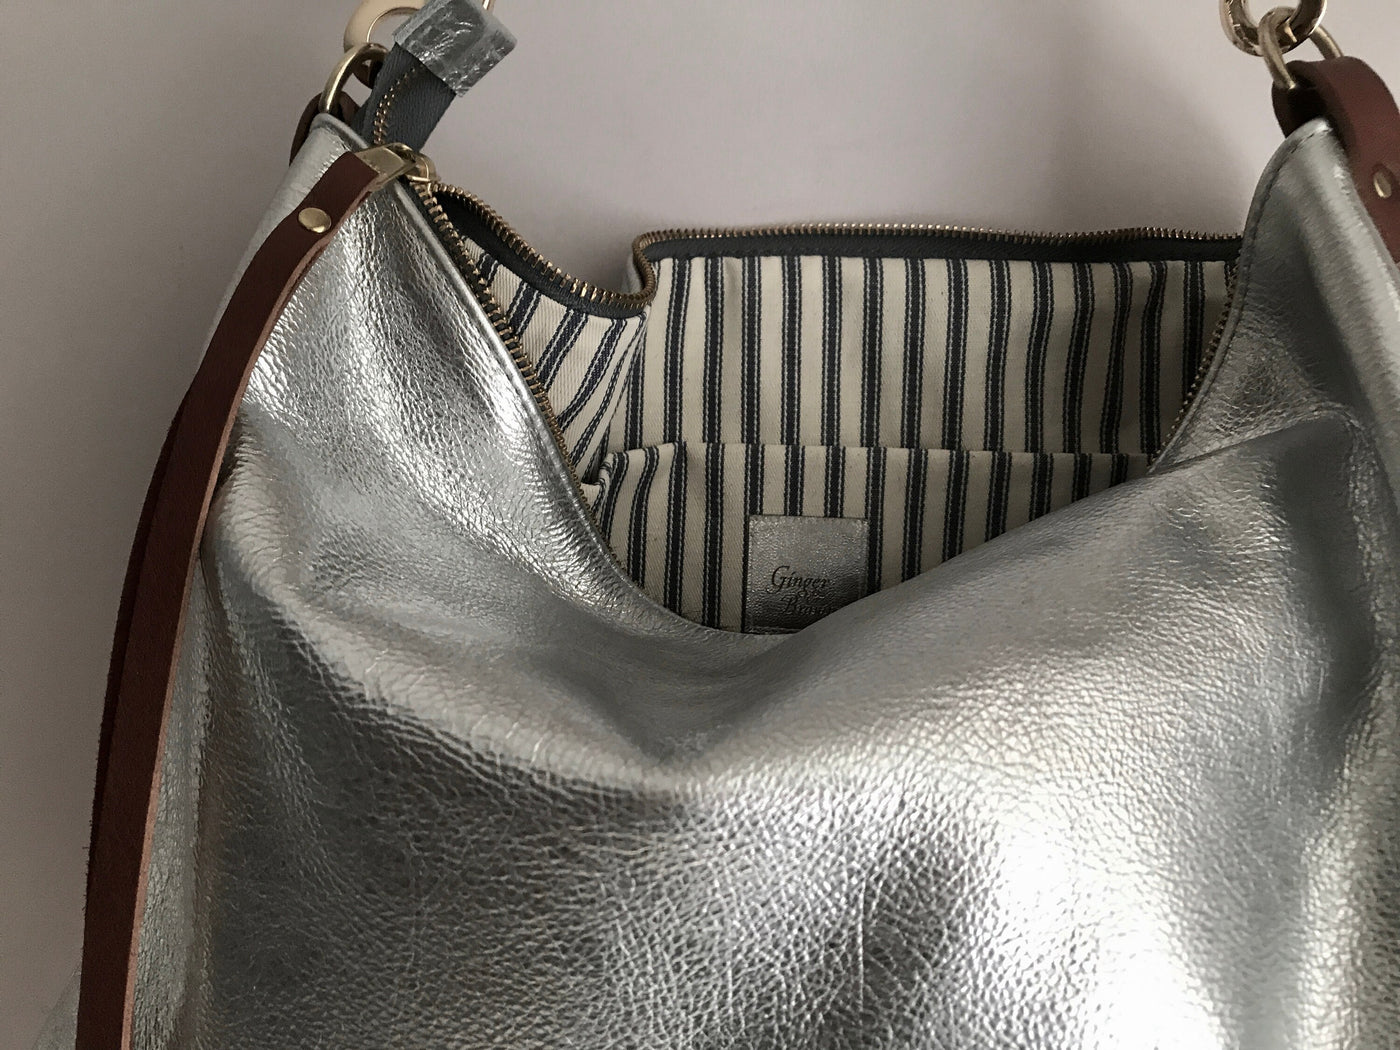 Moon Moon Crescent Shoulder Bag With Half Armpit, Silver Hardware, Zipper  Closure, Adjustable Strap, And Large Capacity For Cell Phone Pocket And Hobo  Purse Perfect For Fashionable Tote Or Walle Use From